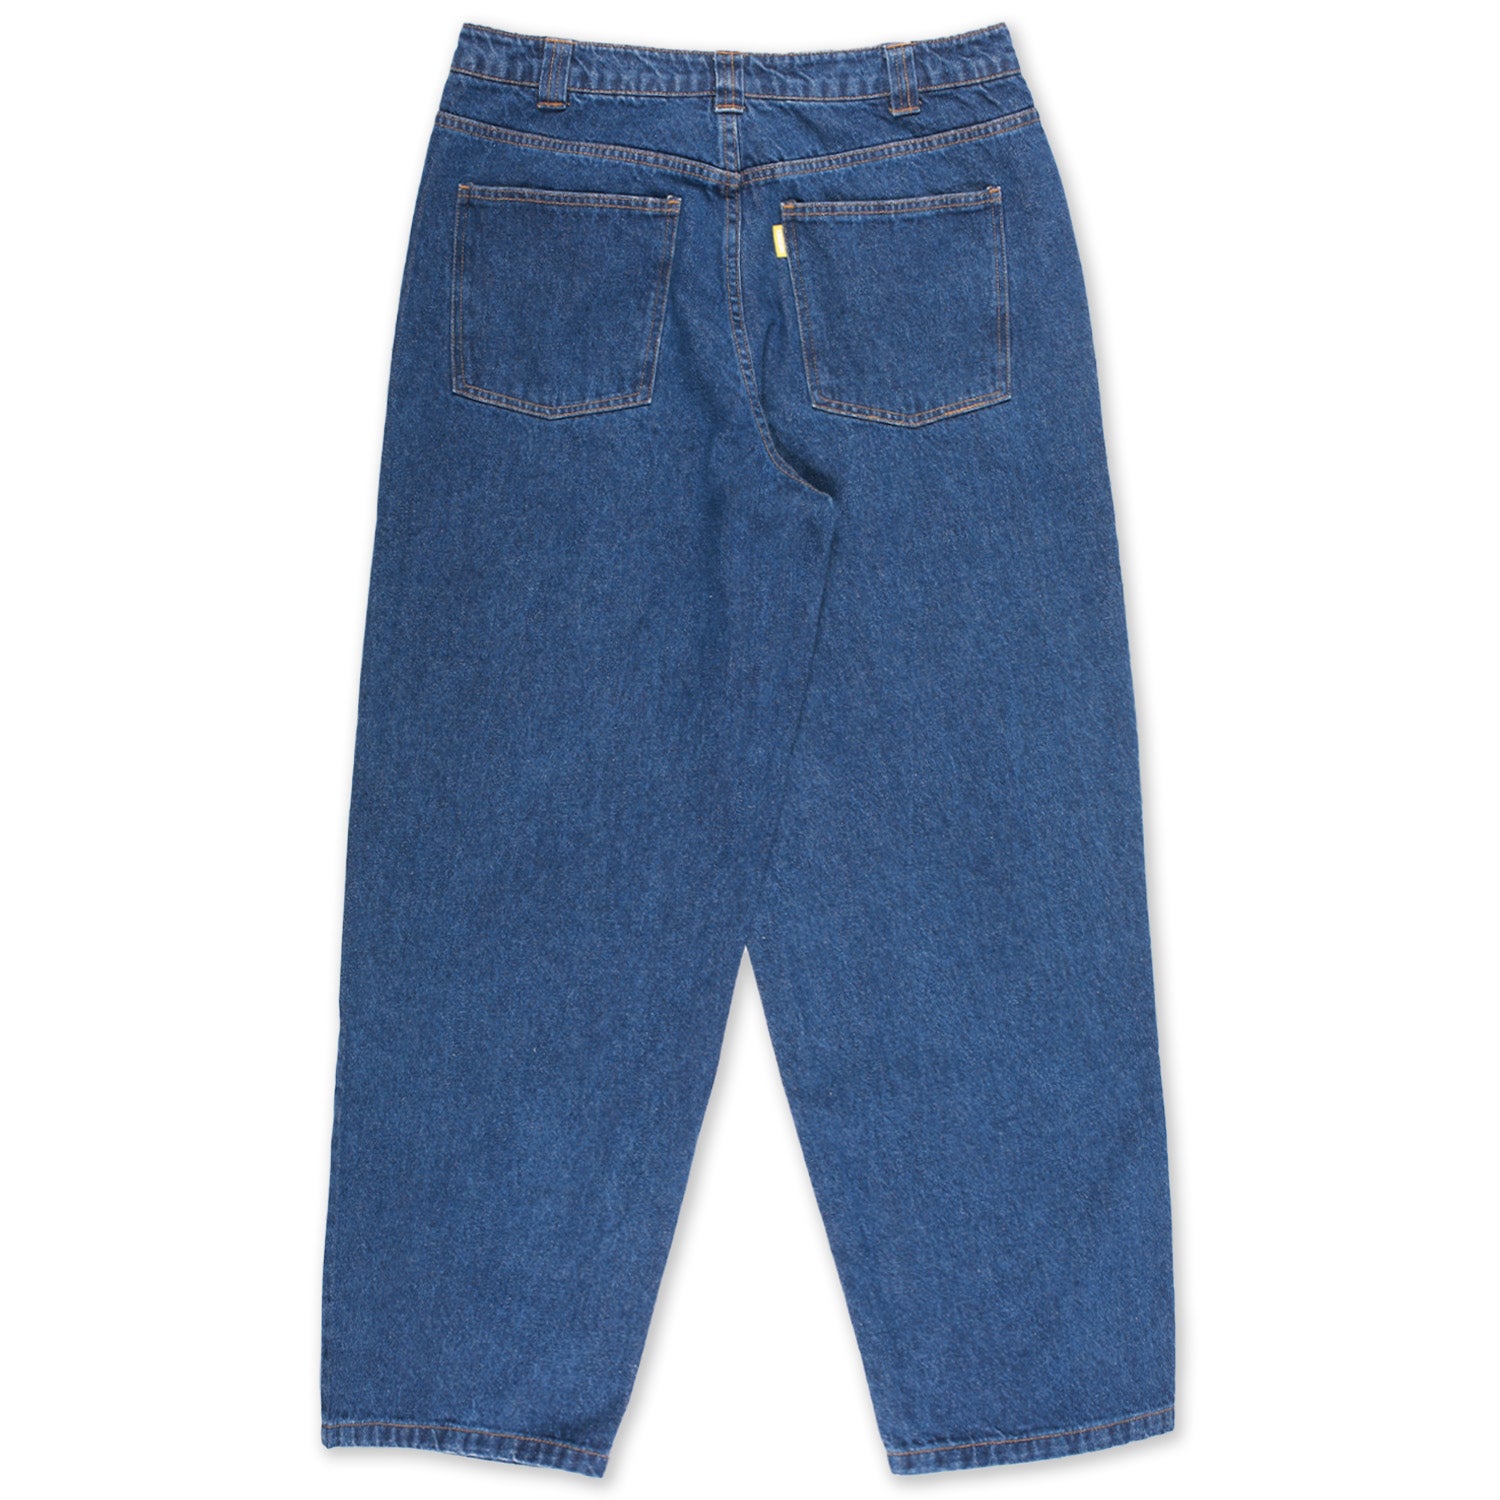 Theories Plaza Jeans Washed Blue – THEORIES OF ATLANTIS